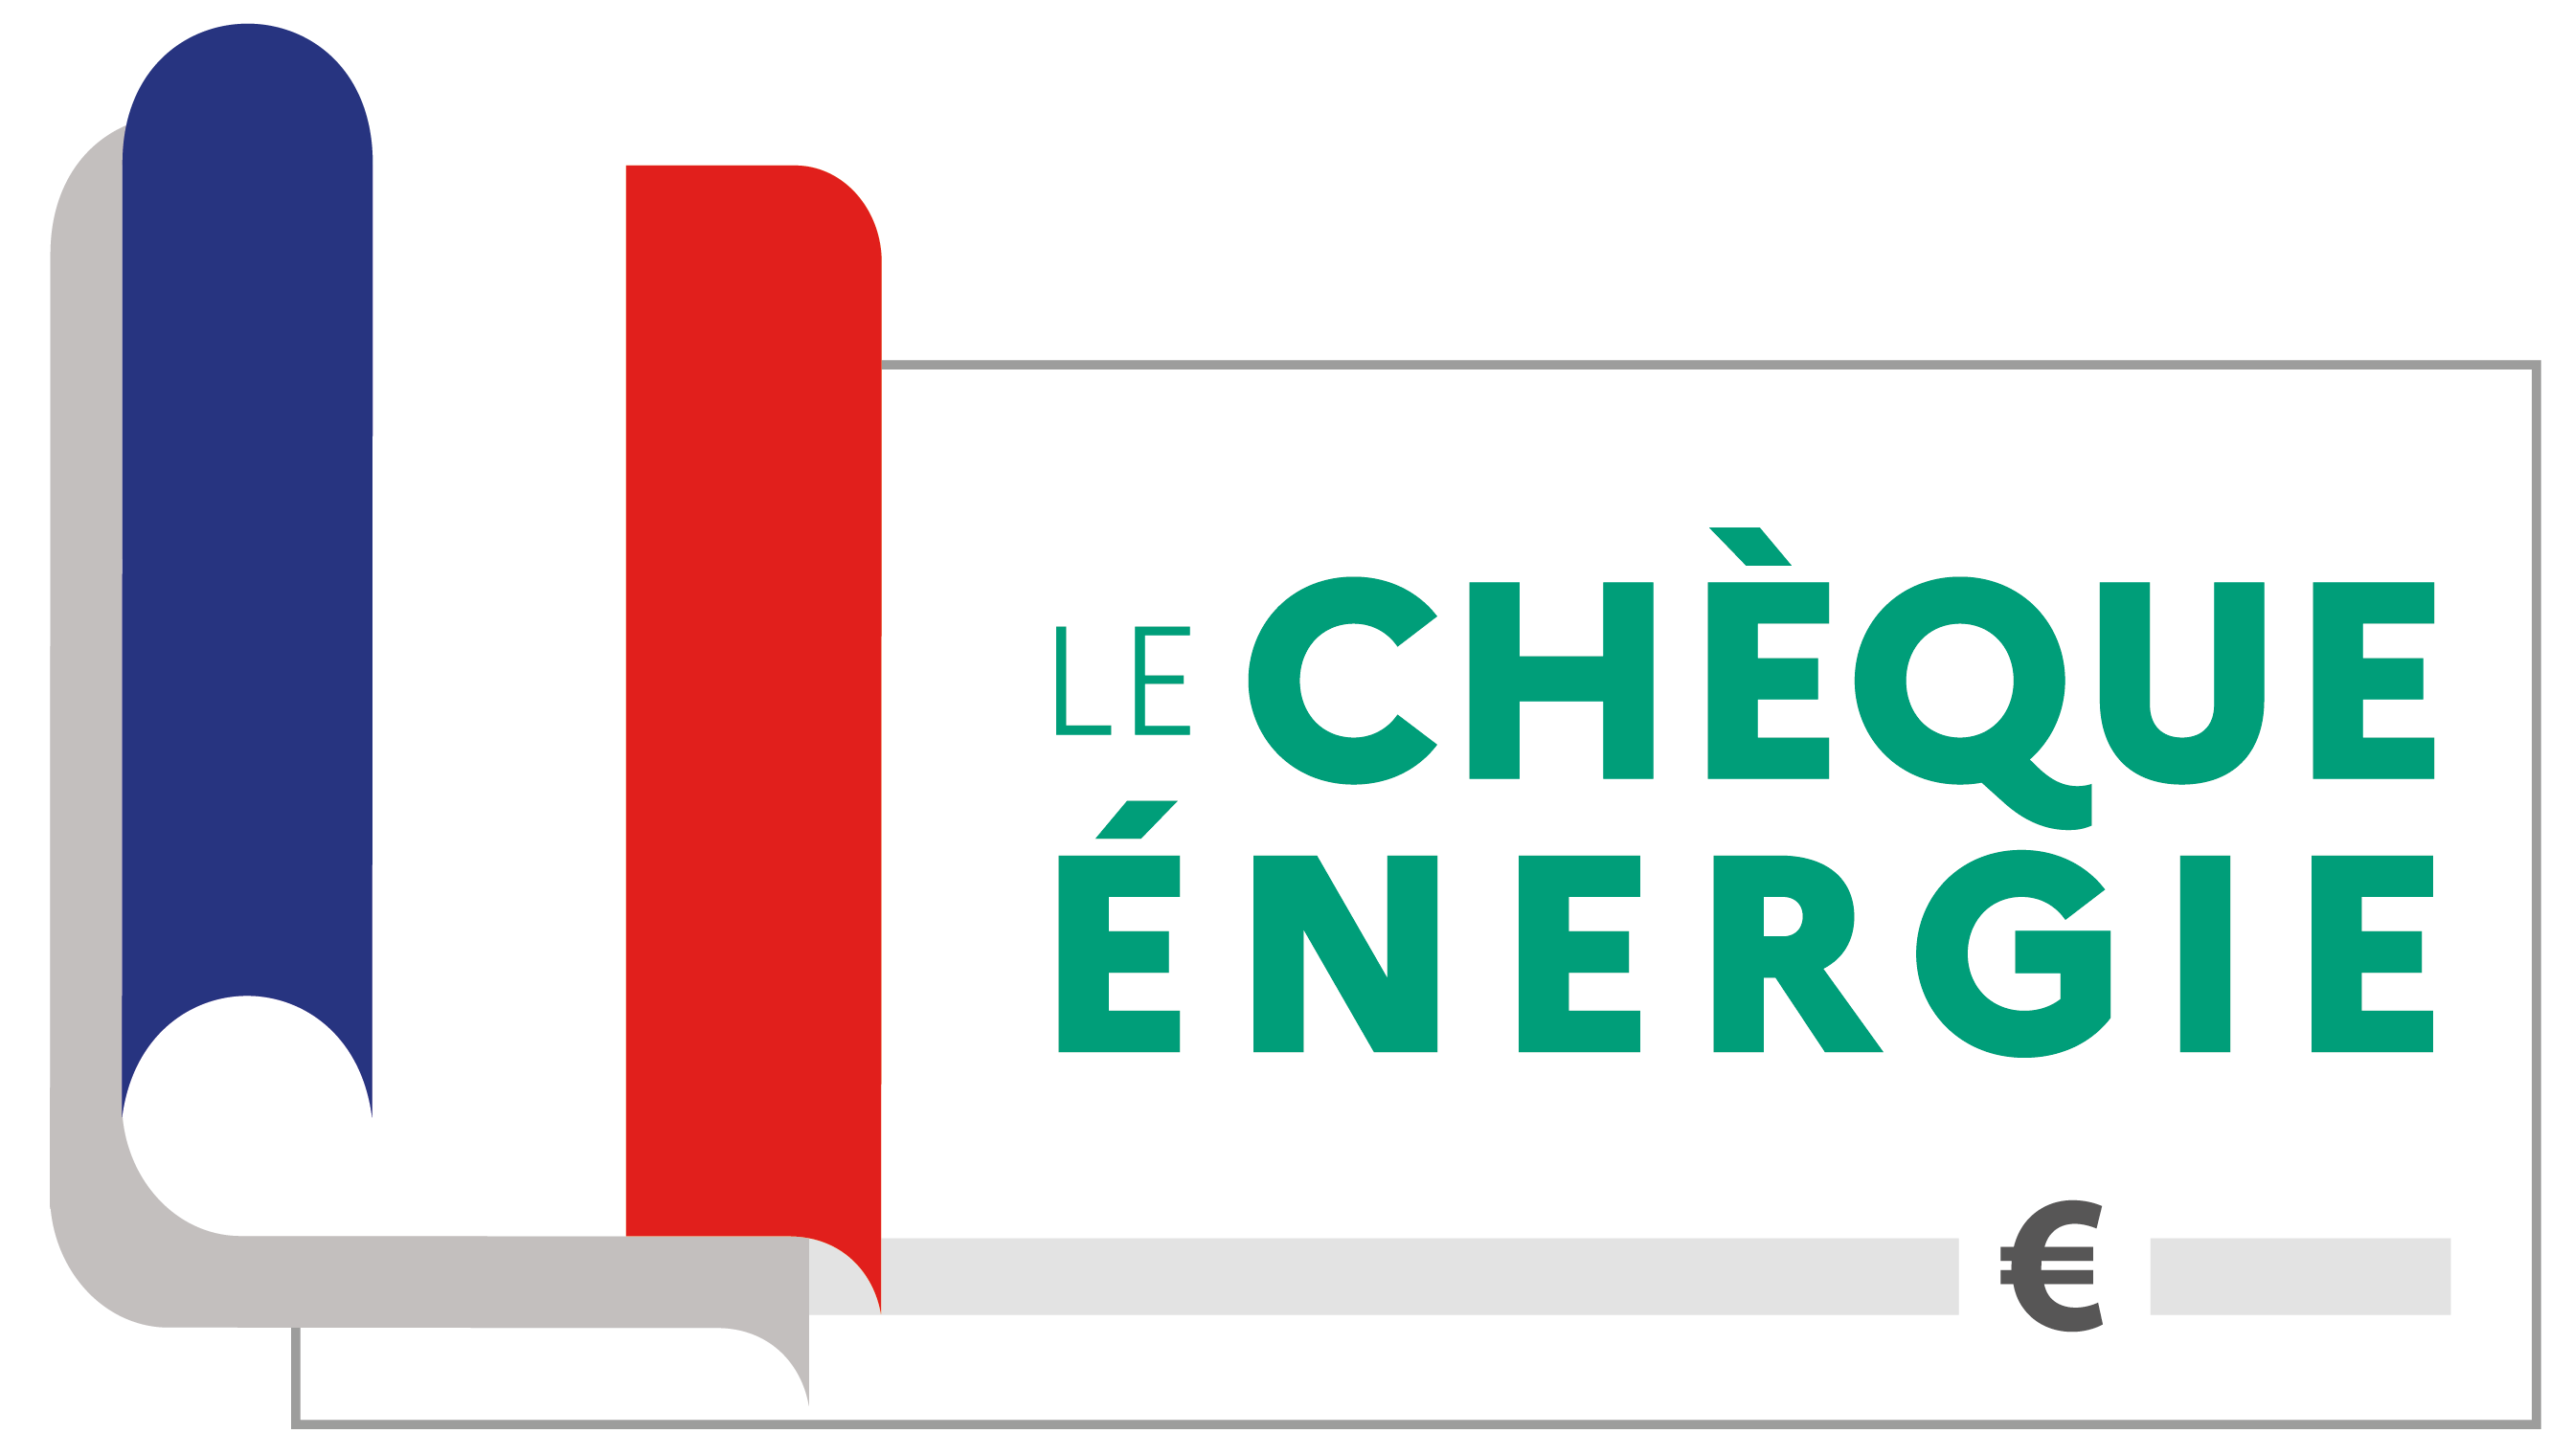 cheque energie.png, 241kB